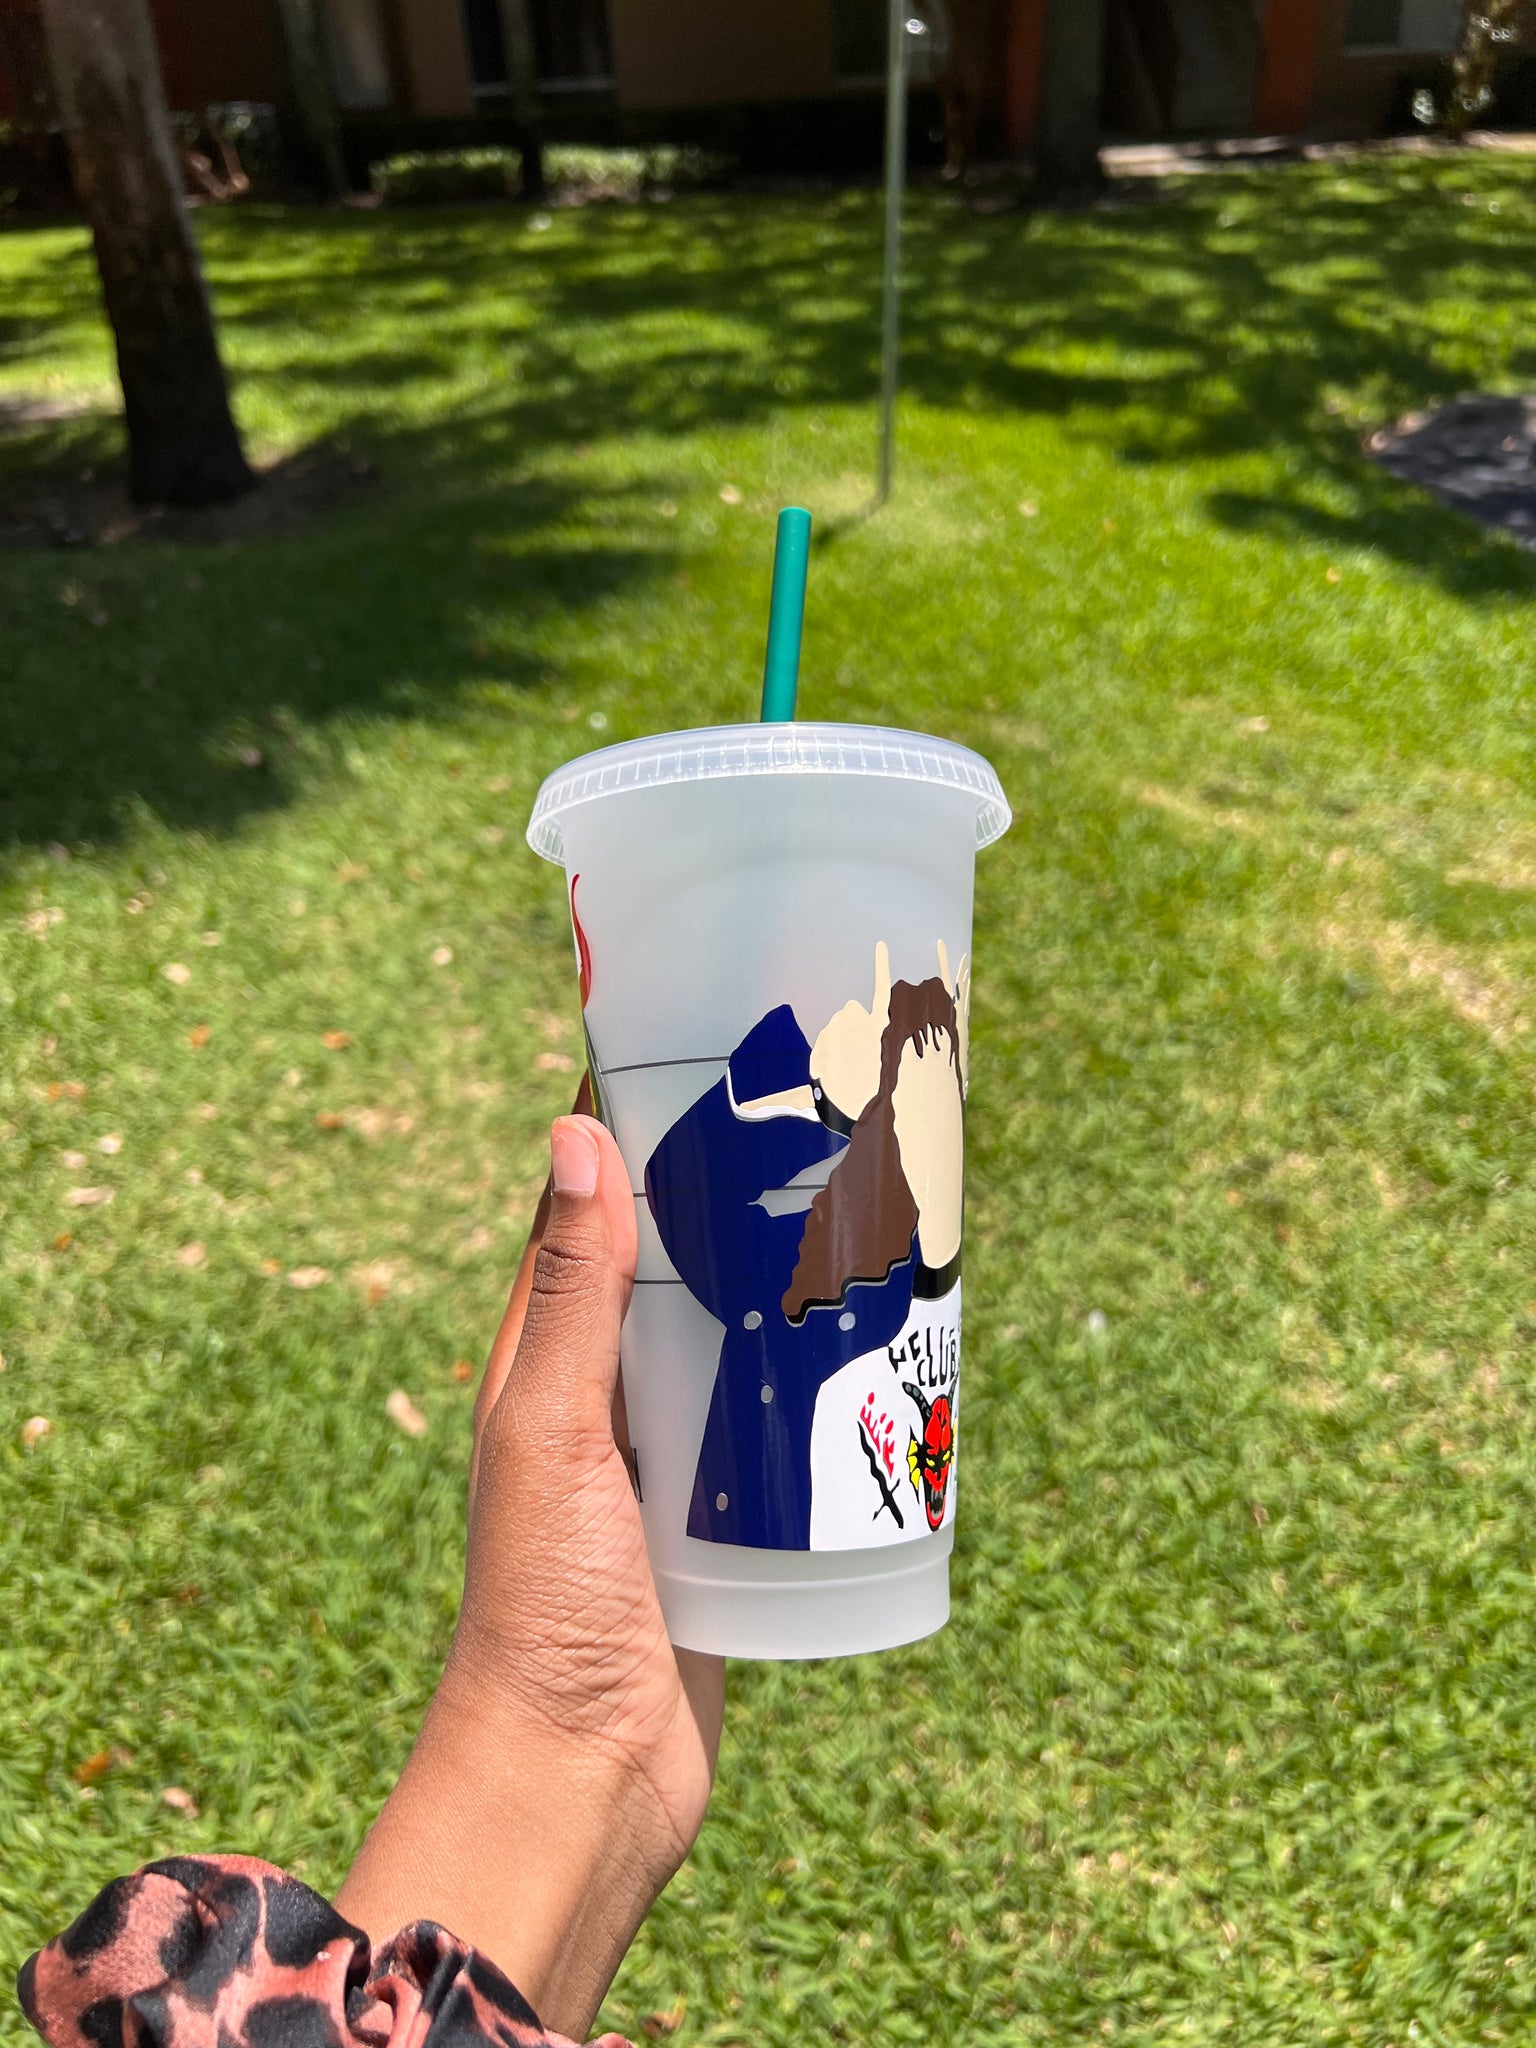 Eddie Munson Stranger Things Starbucks cup - HPK Personalized Products and more